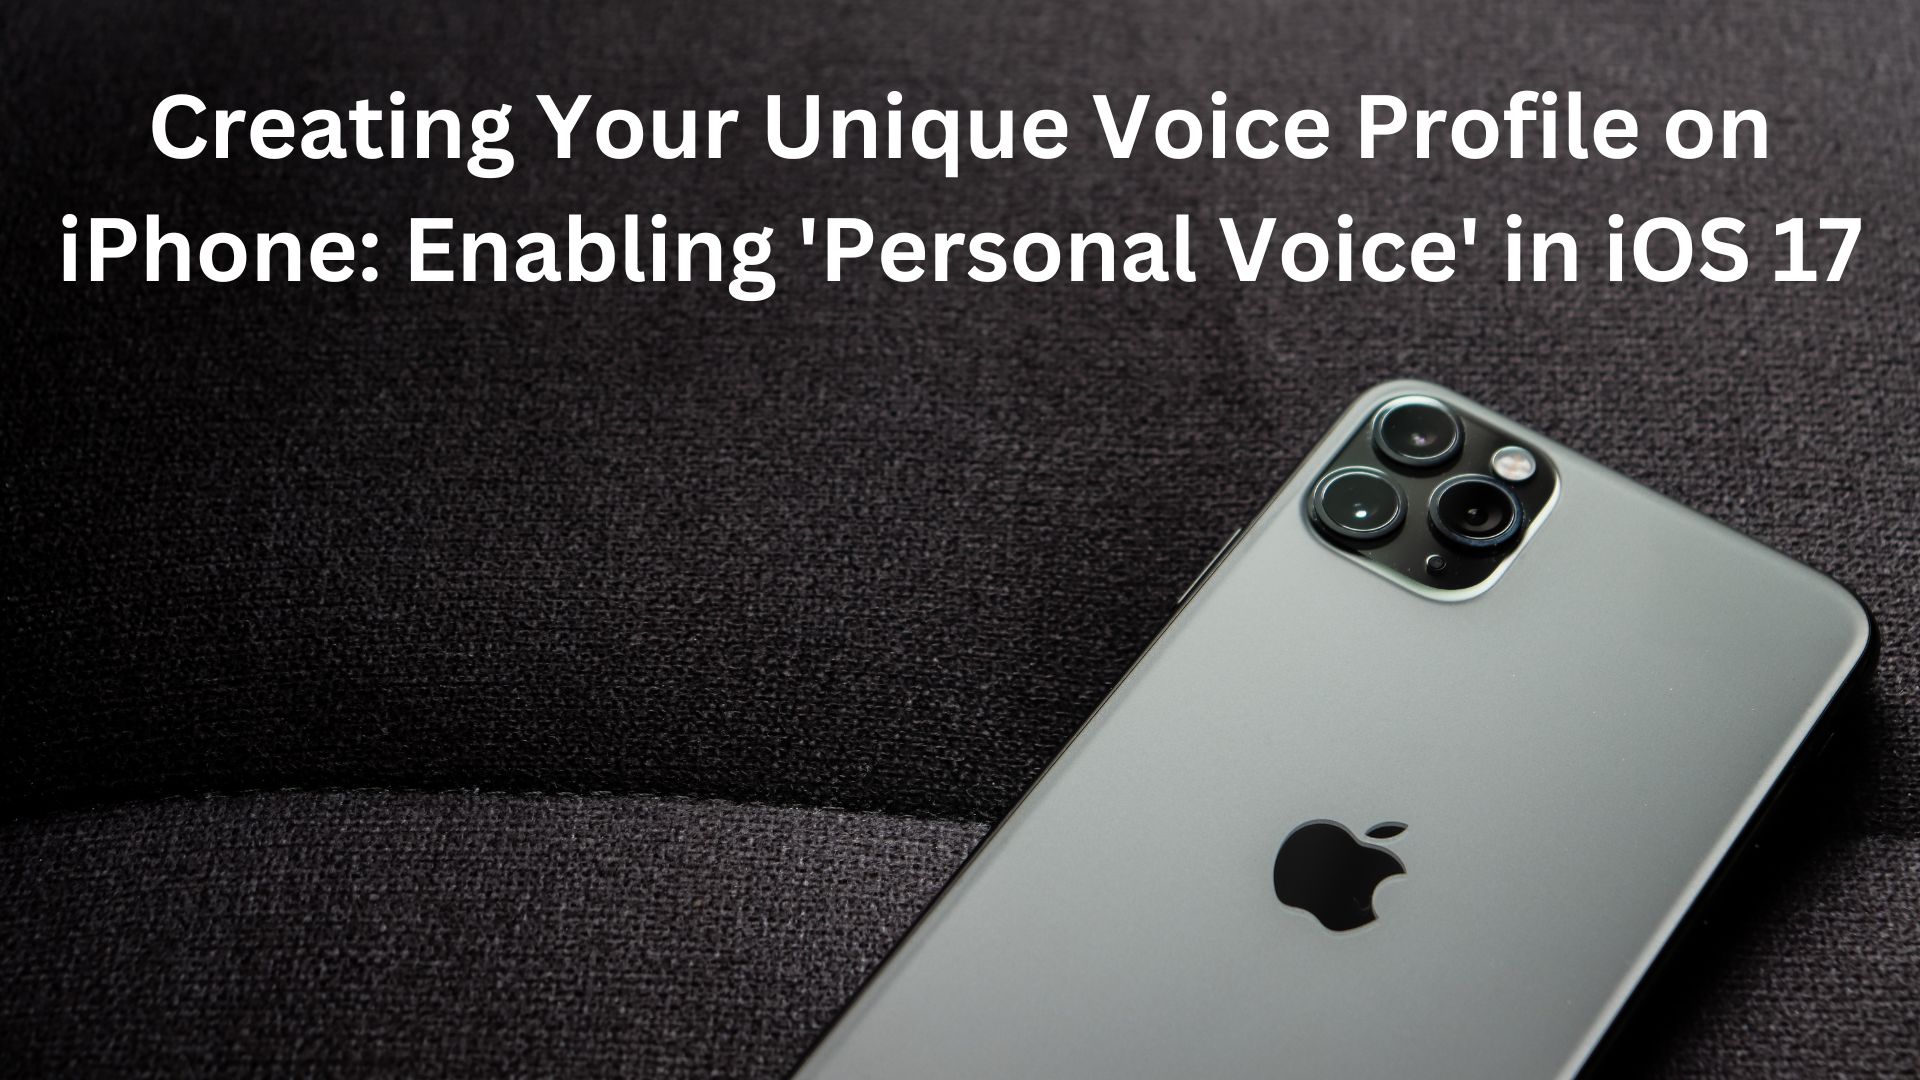 Creating Your Unique Voice Profile on iPhone: Enabling 'Personal Voice' in iOS 17